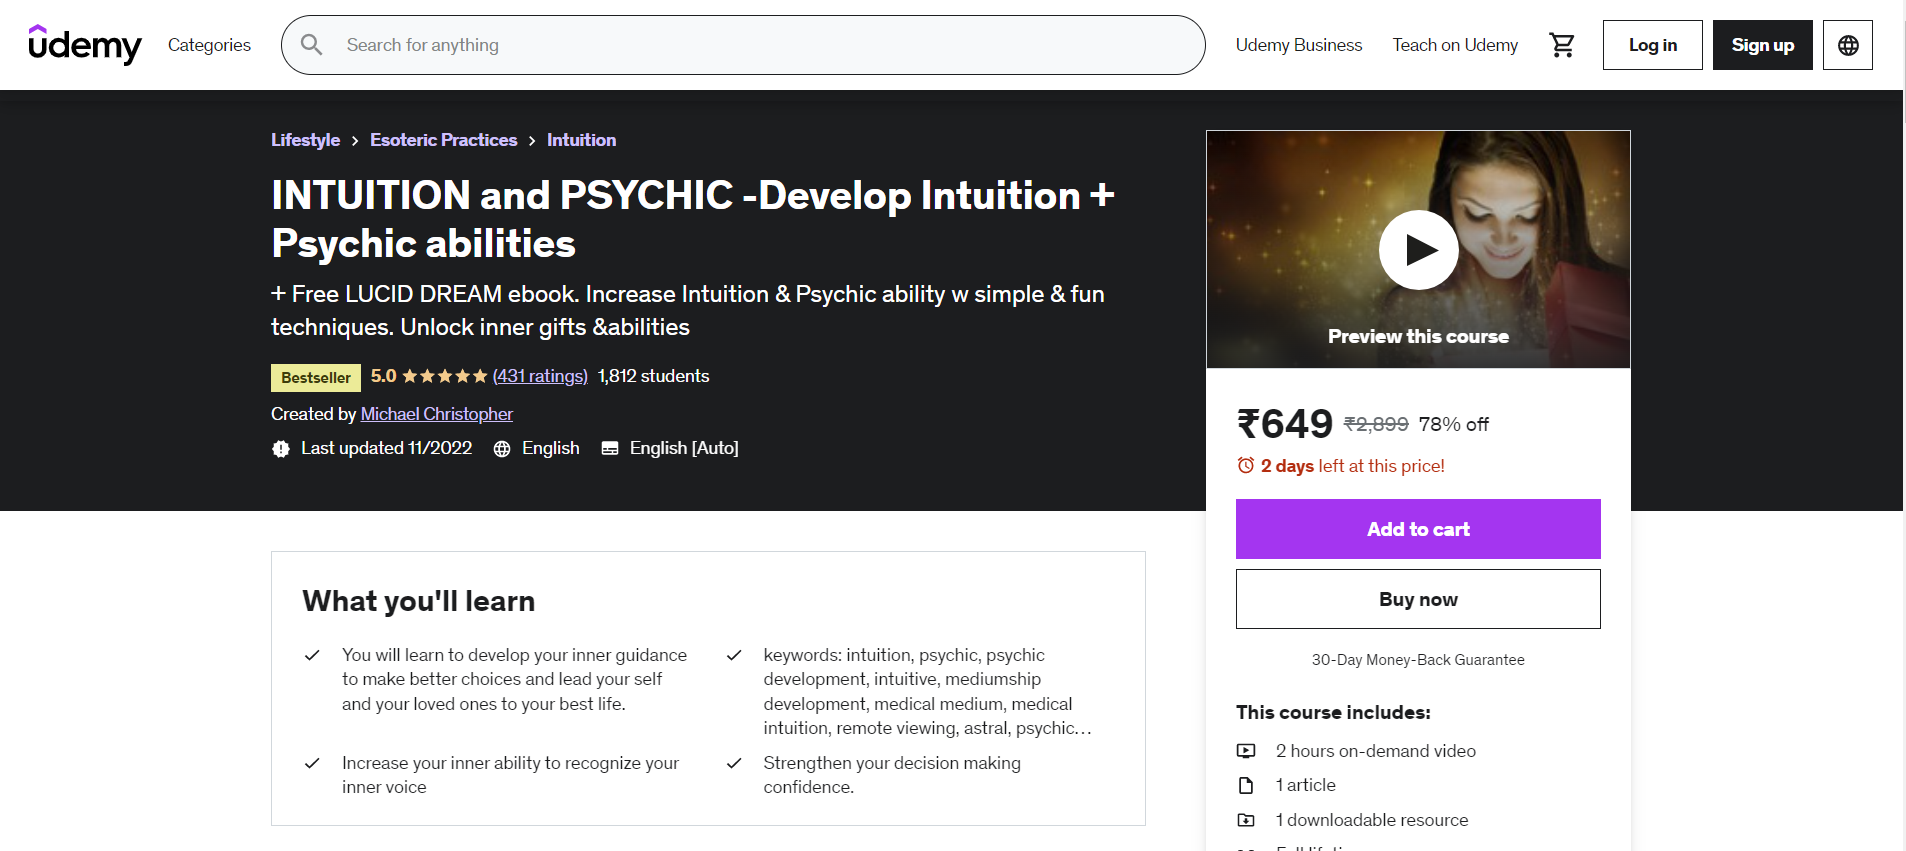 INTUITION and PSYCHIC- Develop intuition + Psychic abilities